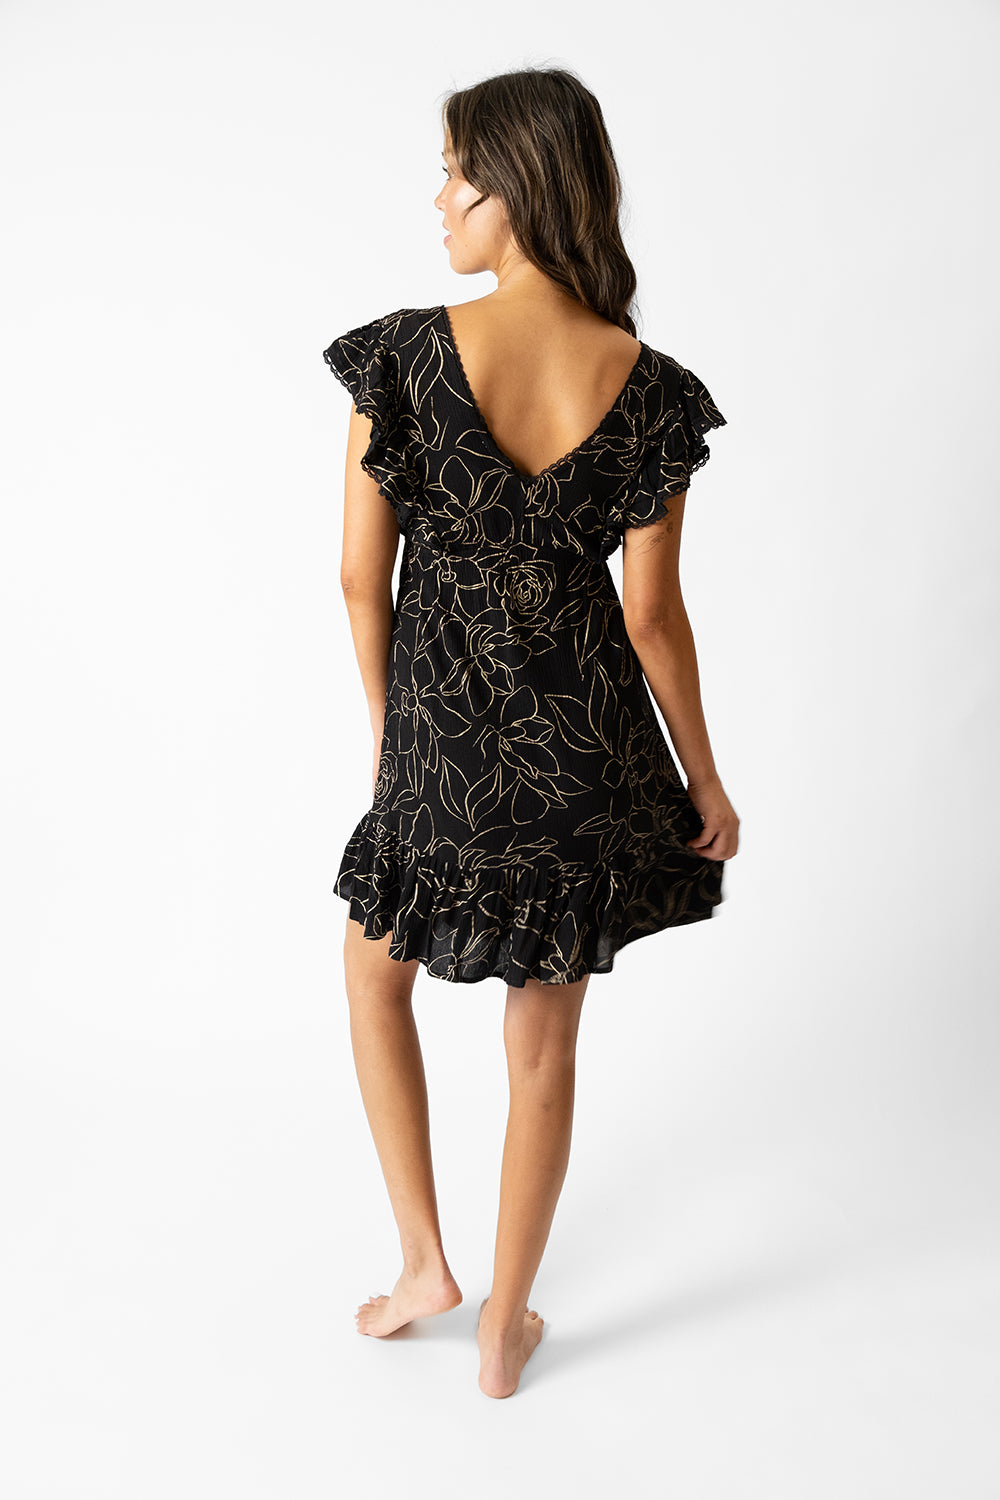 koy resort miami shine ruffle short sleeve v-neck dress with gold tone abstract floral print on black crinkle rayon for spring 2024 women's resort wear collection